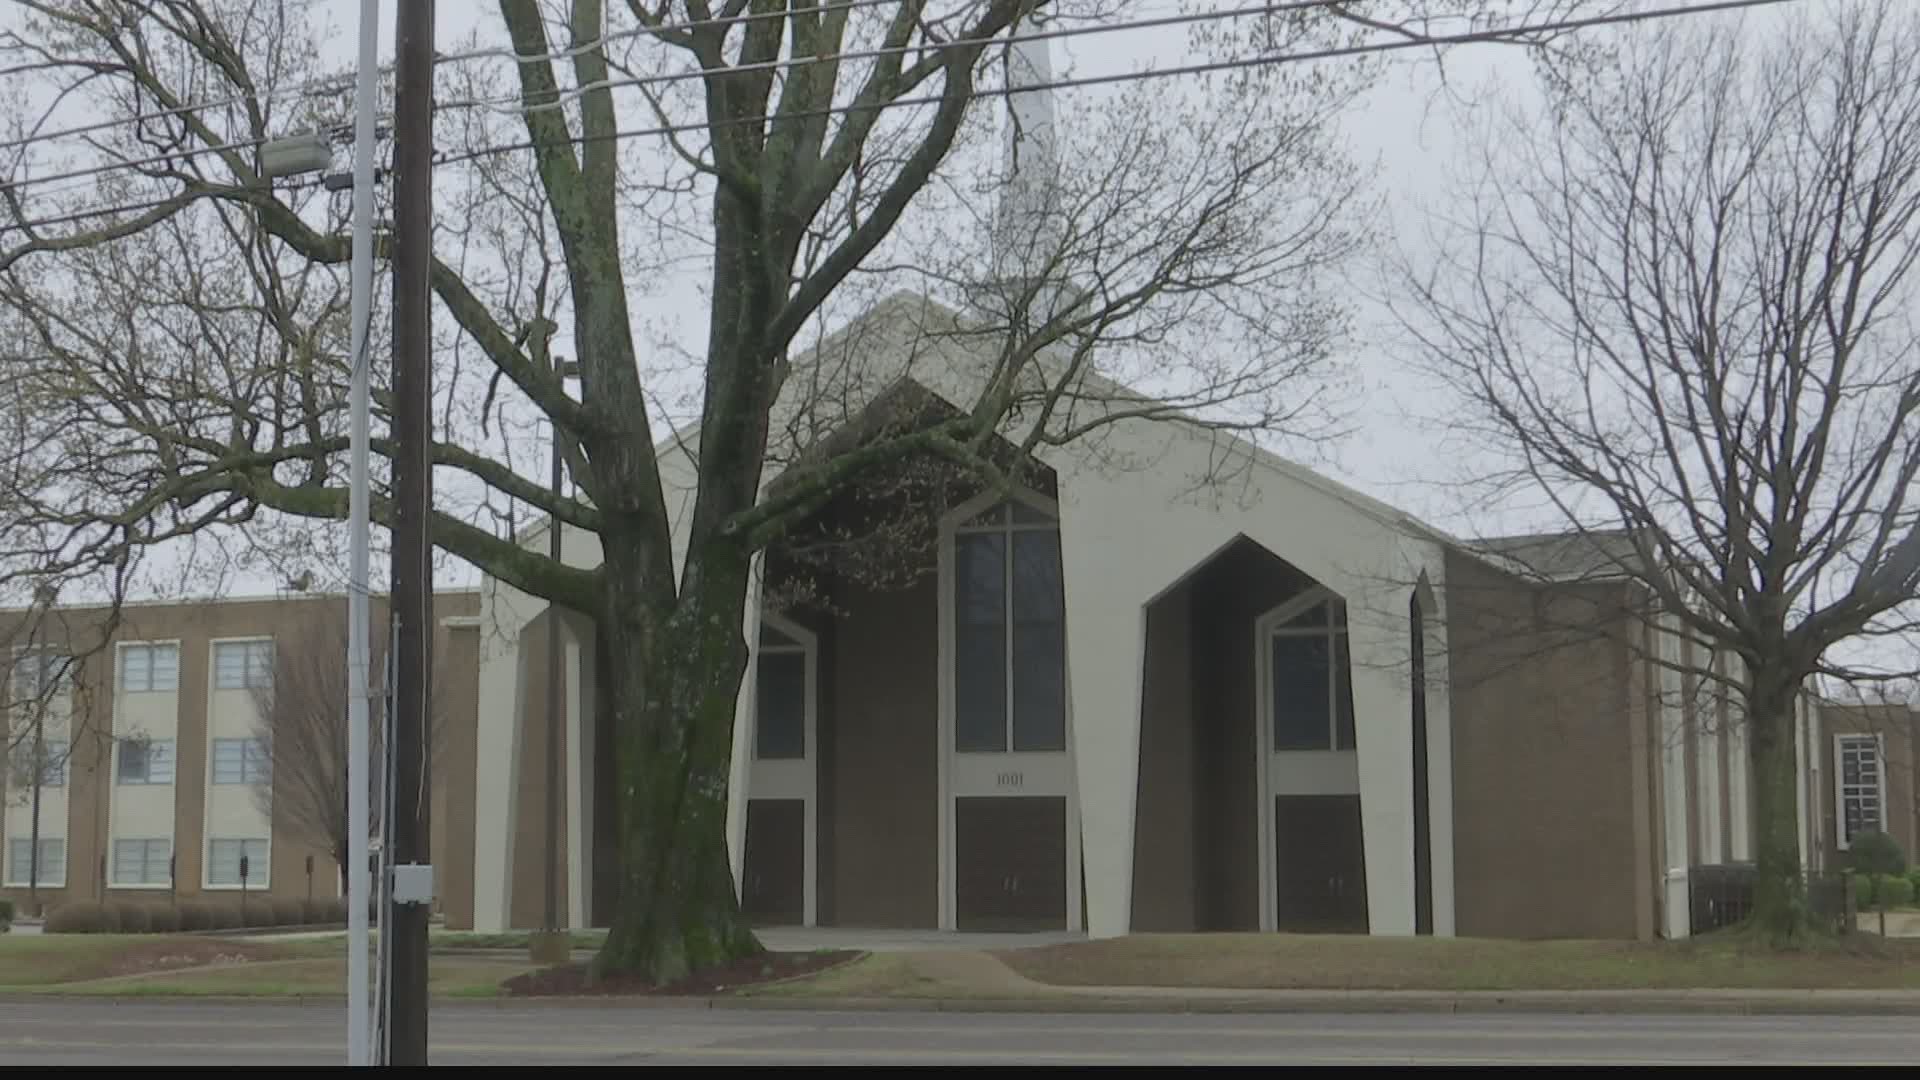 Places of worship throughout Huntsville had to adjust services as a way to take precaution.